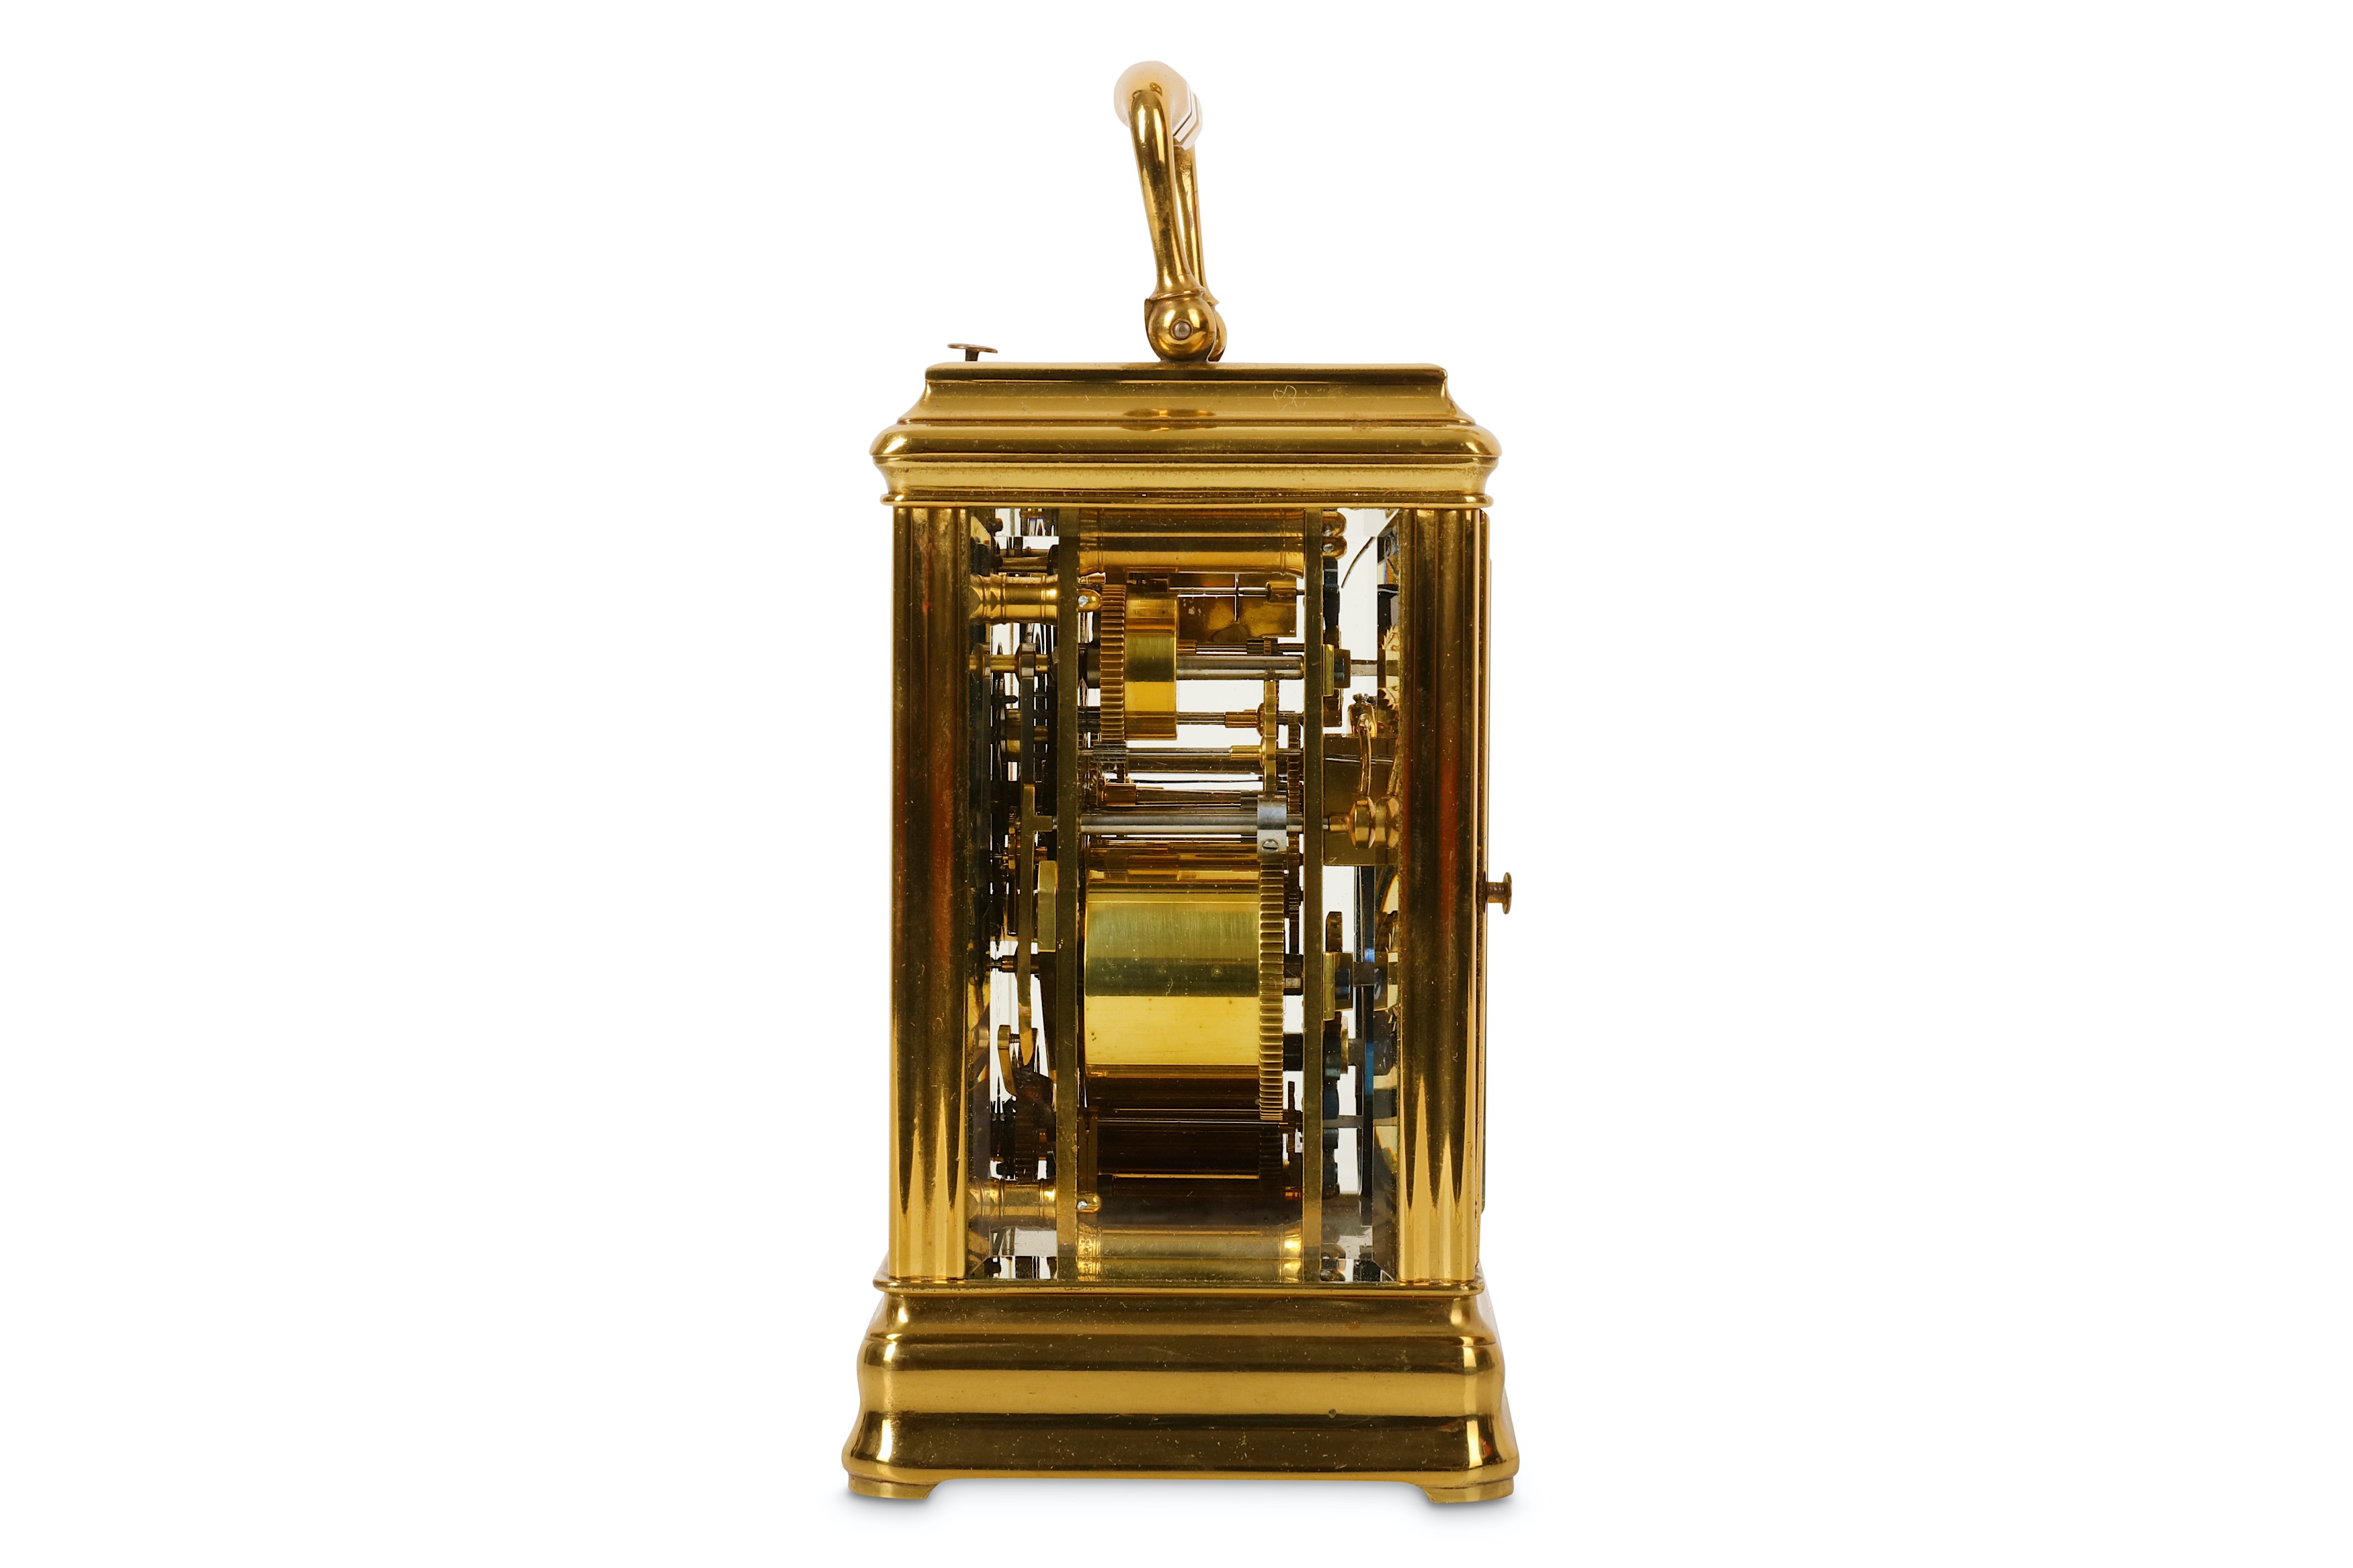 A LATE 19TH CENTURY FRENCH LACQUERED BRASS CARRIAGE CLOCK WITH ALARM AND REPEAT  the gorge case with - Image 4 of 5